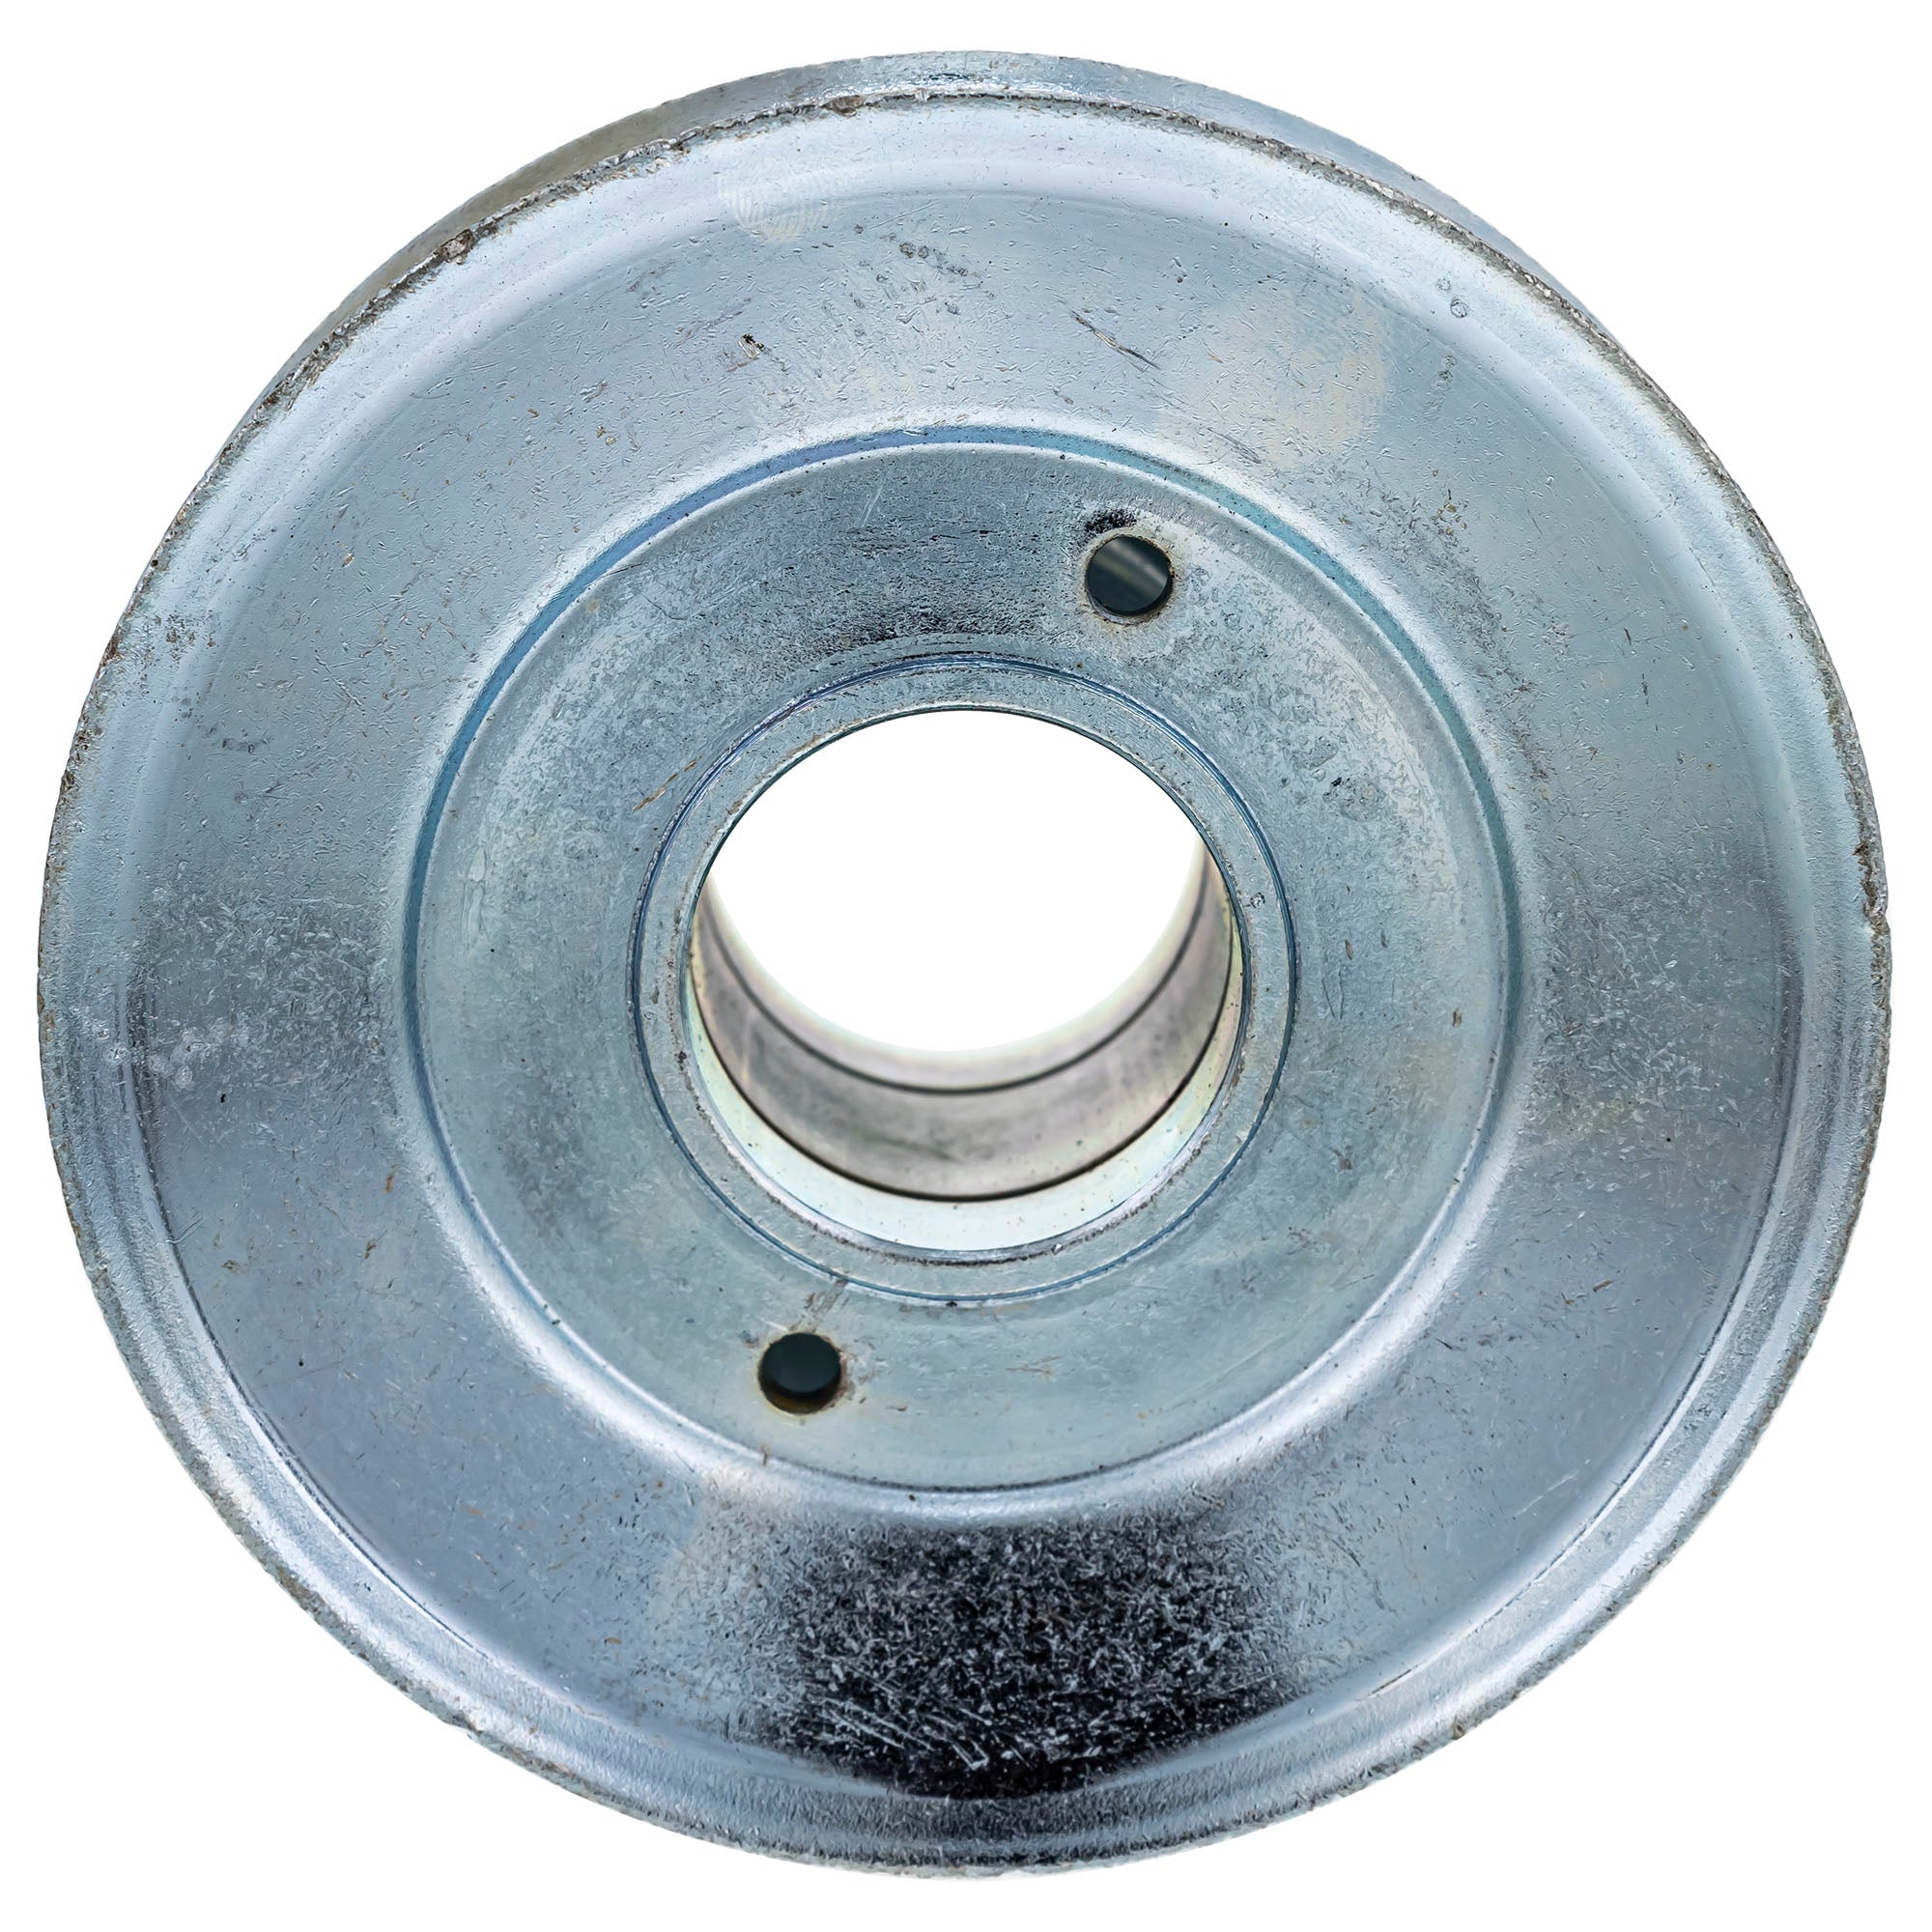 756-3115  Double Pulley 5.065/4.659 GT 44 54 2554 2550 2544 2523